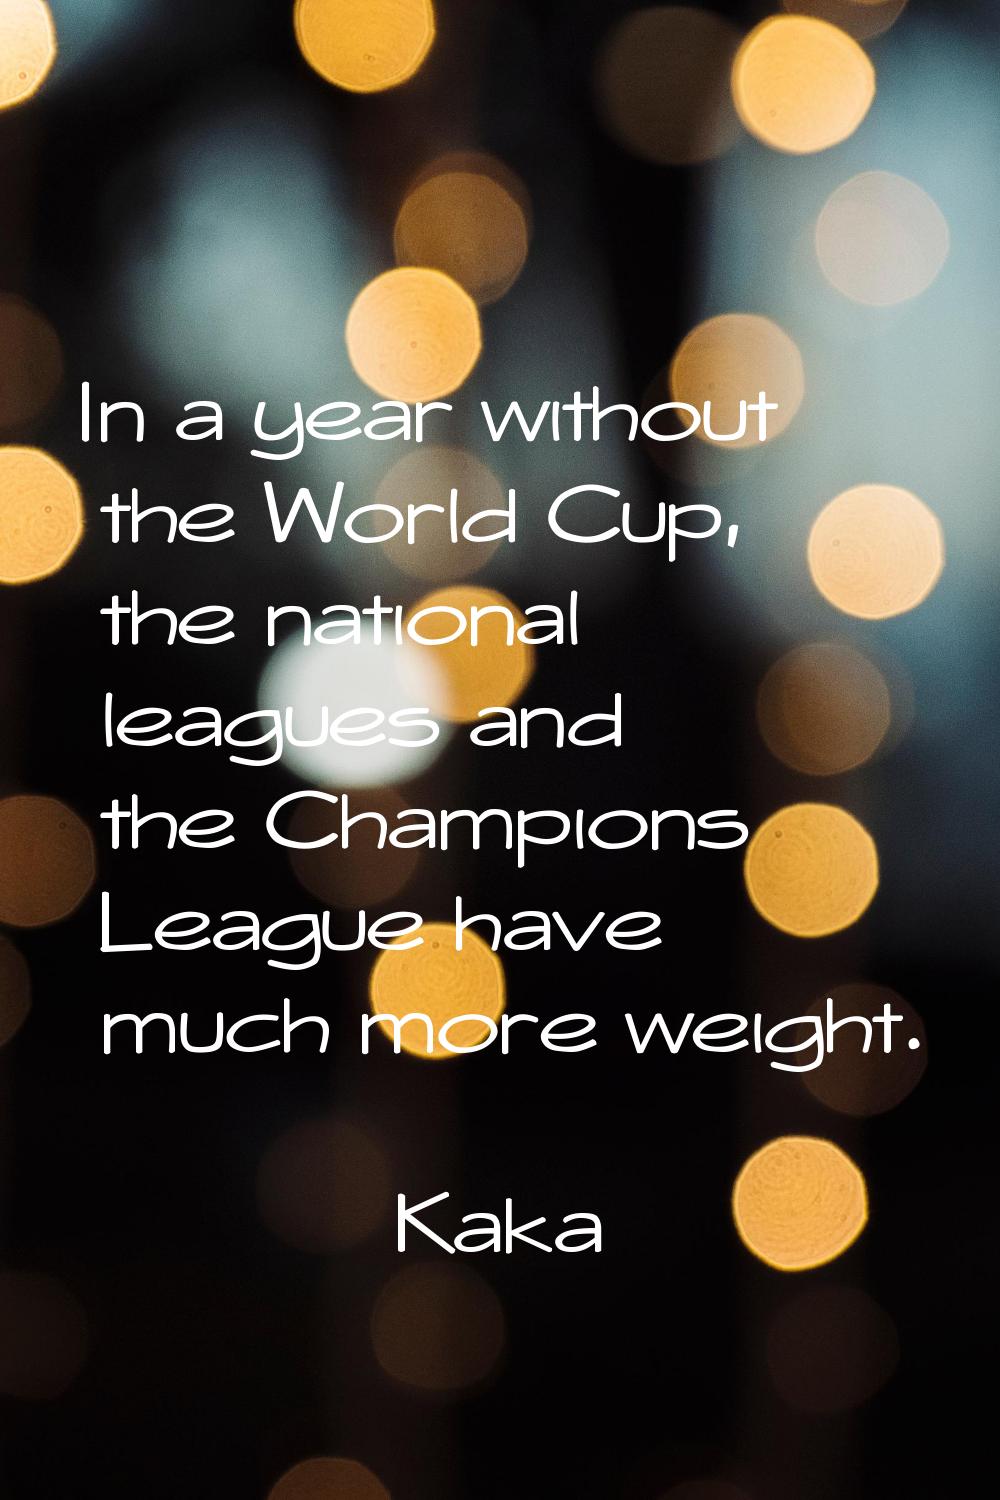 In a year without the World Cup, the national leagues and the Champions League have much more weigh